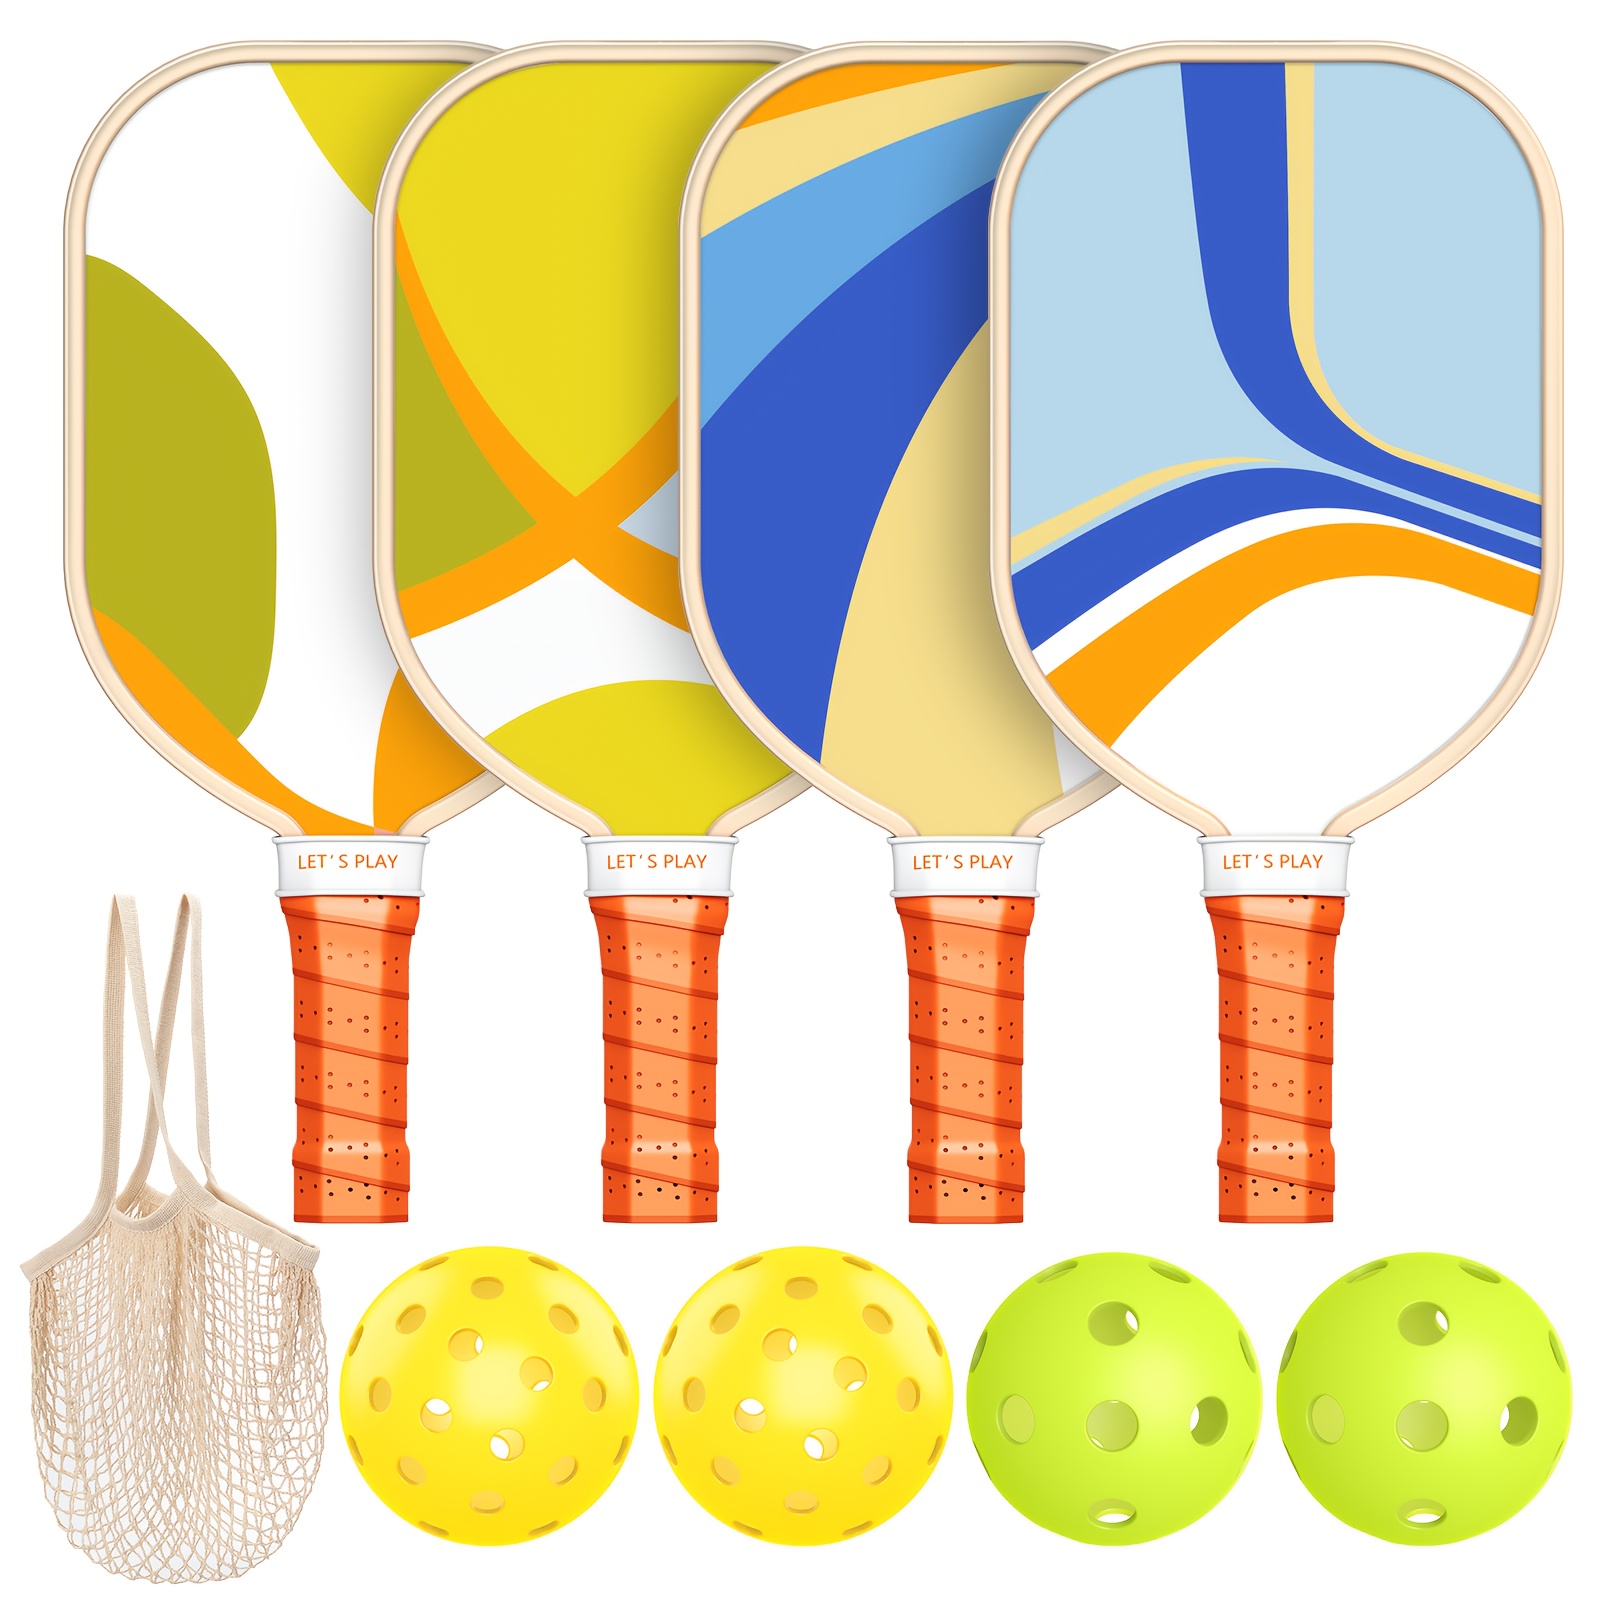 

Pickleball Paddles Set Of 4 With 4 Pickleball Balls And 1 Carry Bag, Pickleball Rackets With Ergonomic Cushion Grip For Beginner & Intermediate, Gifts For Women Men